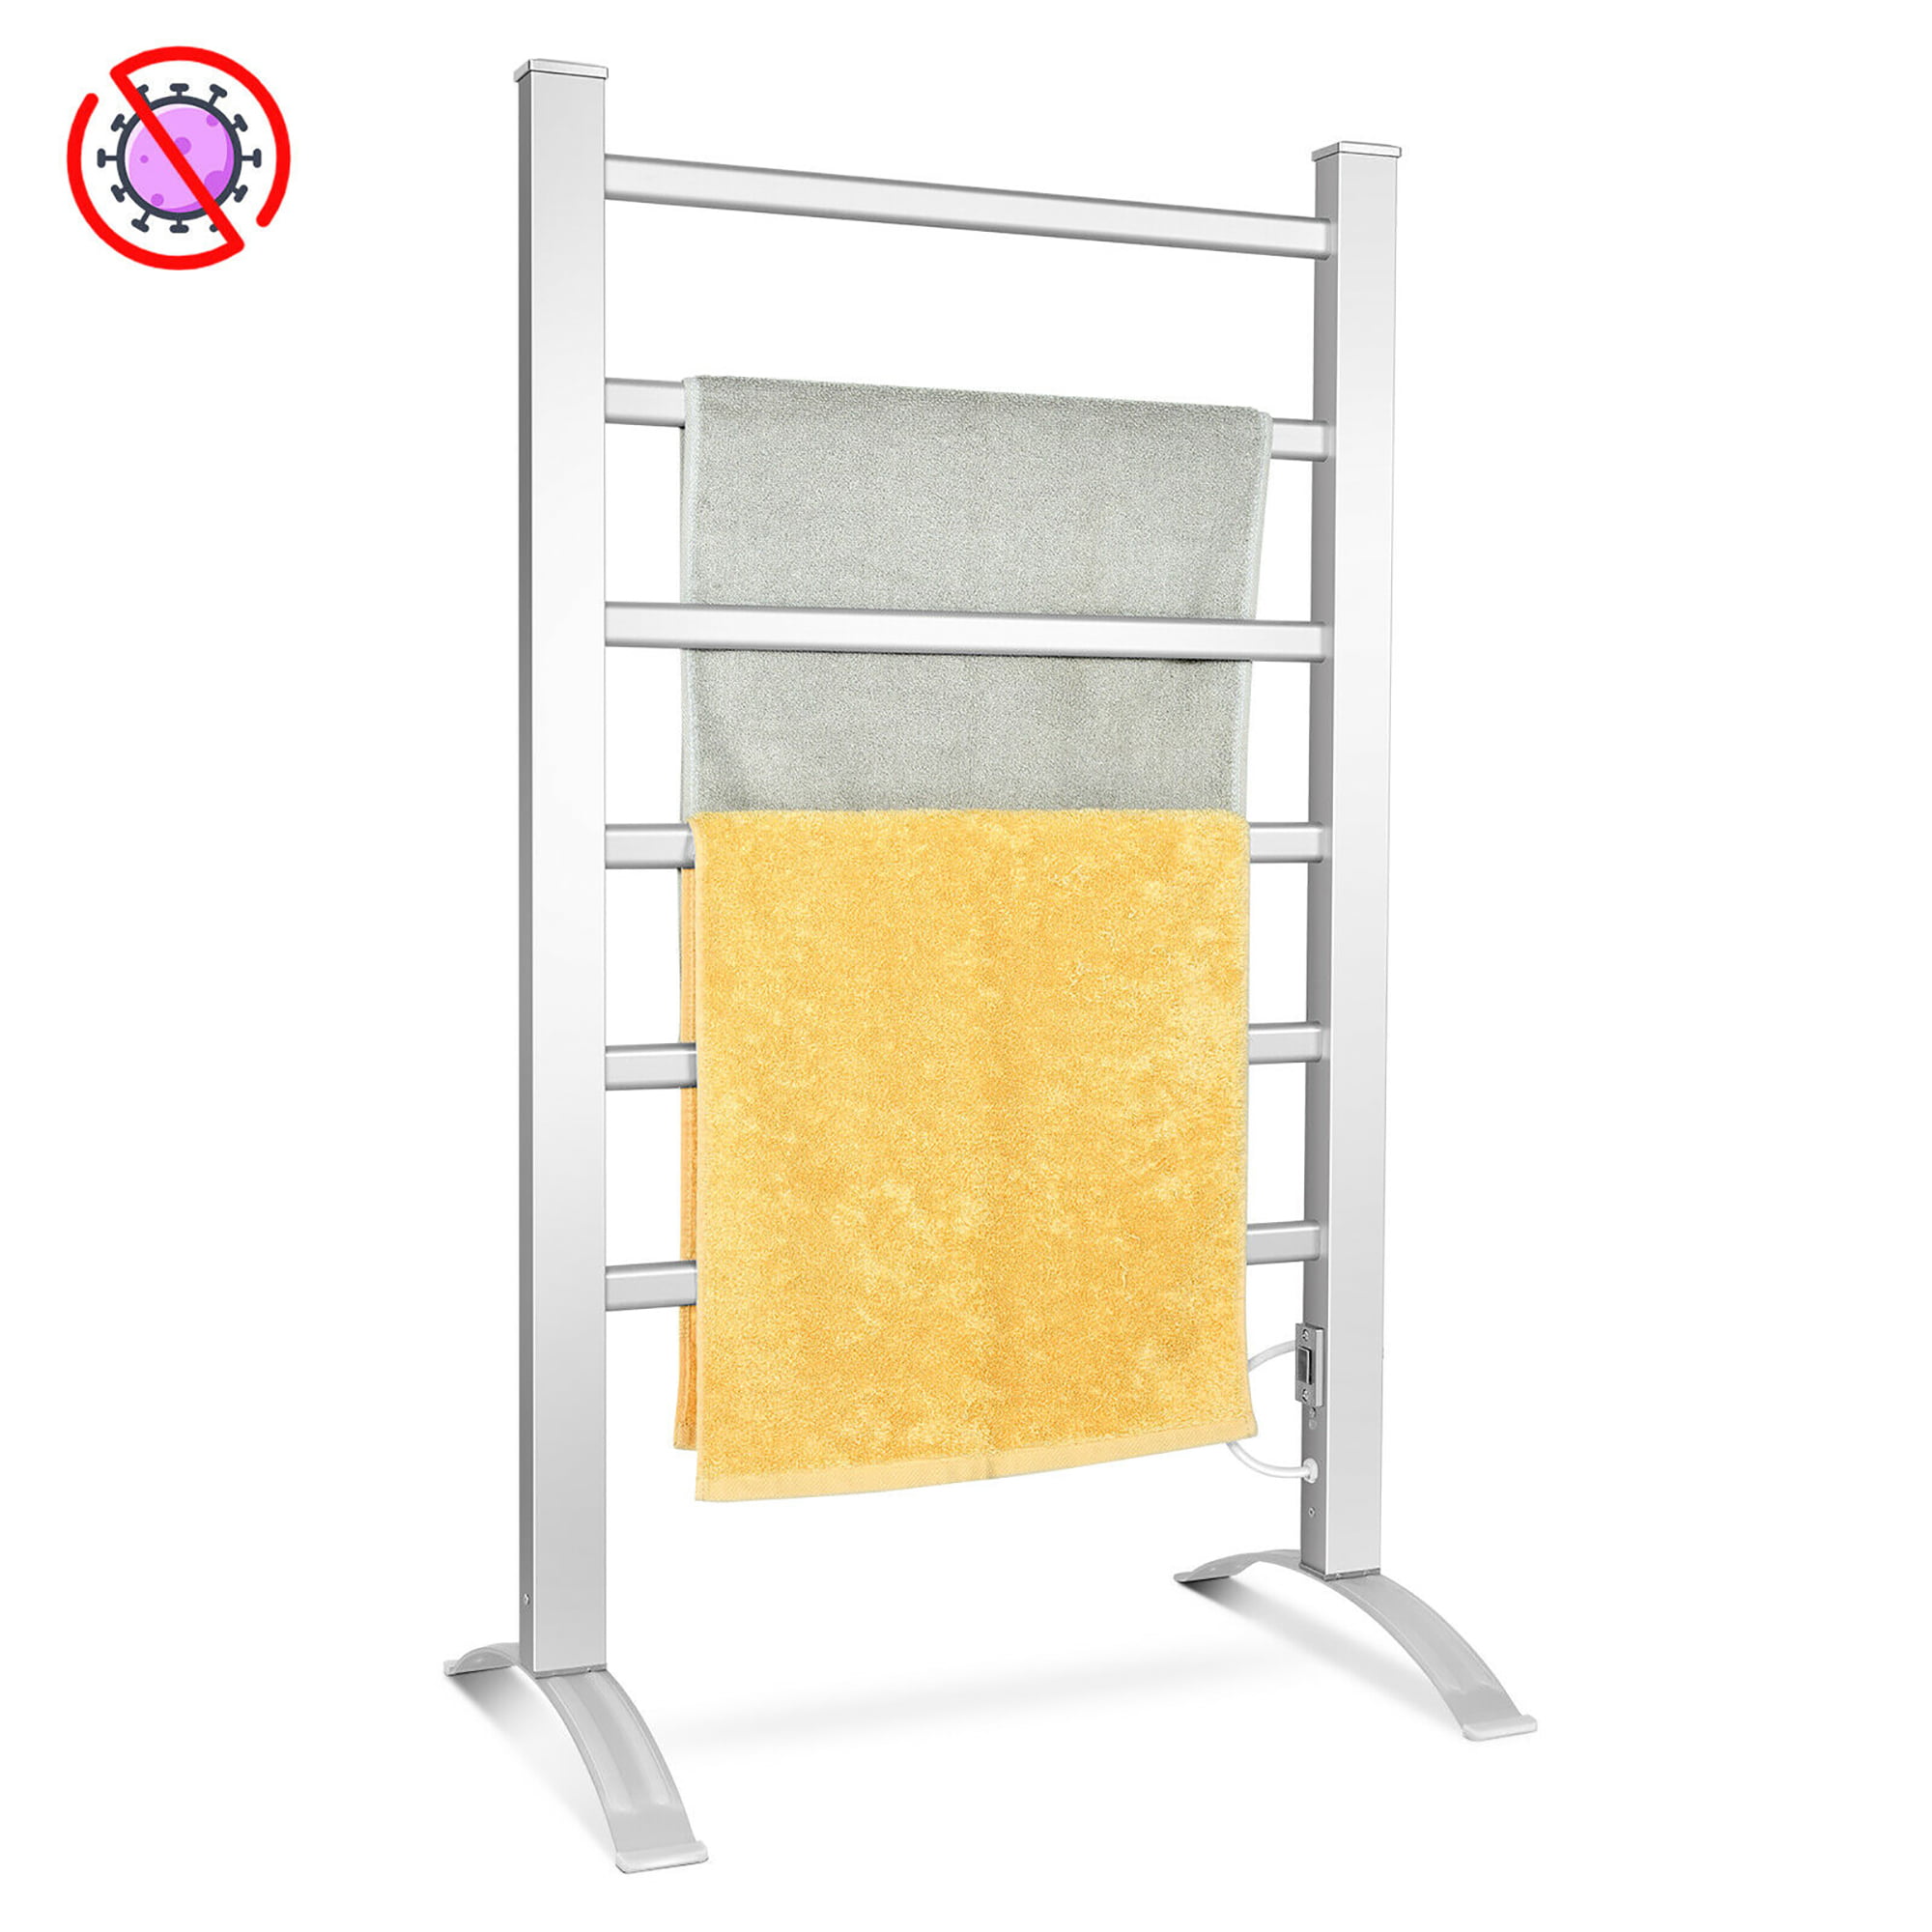 Freestanding Plug In Electric Heated Portable Towel Clothes Rail Heater Dryer UK 